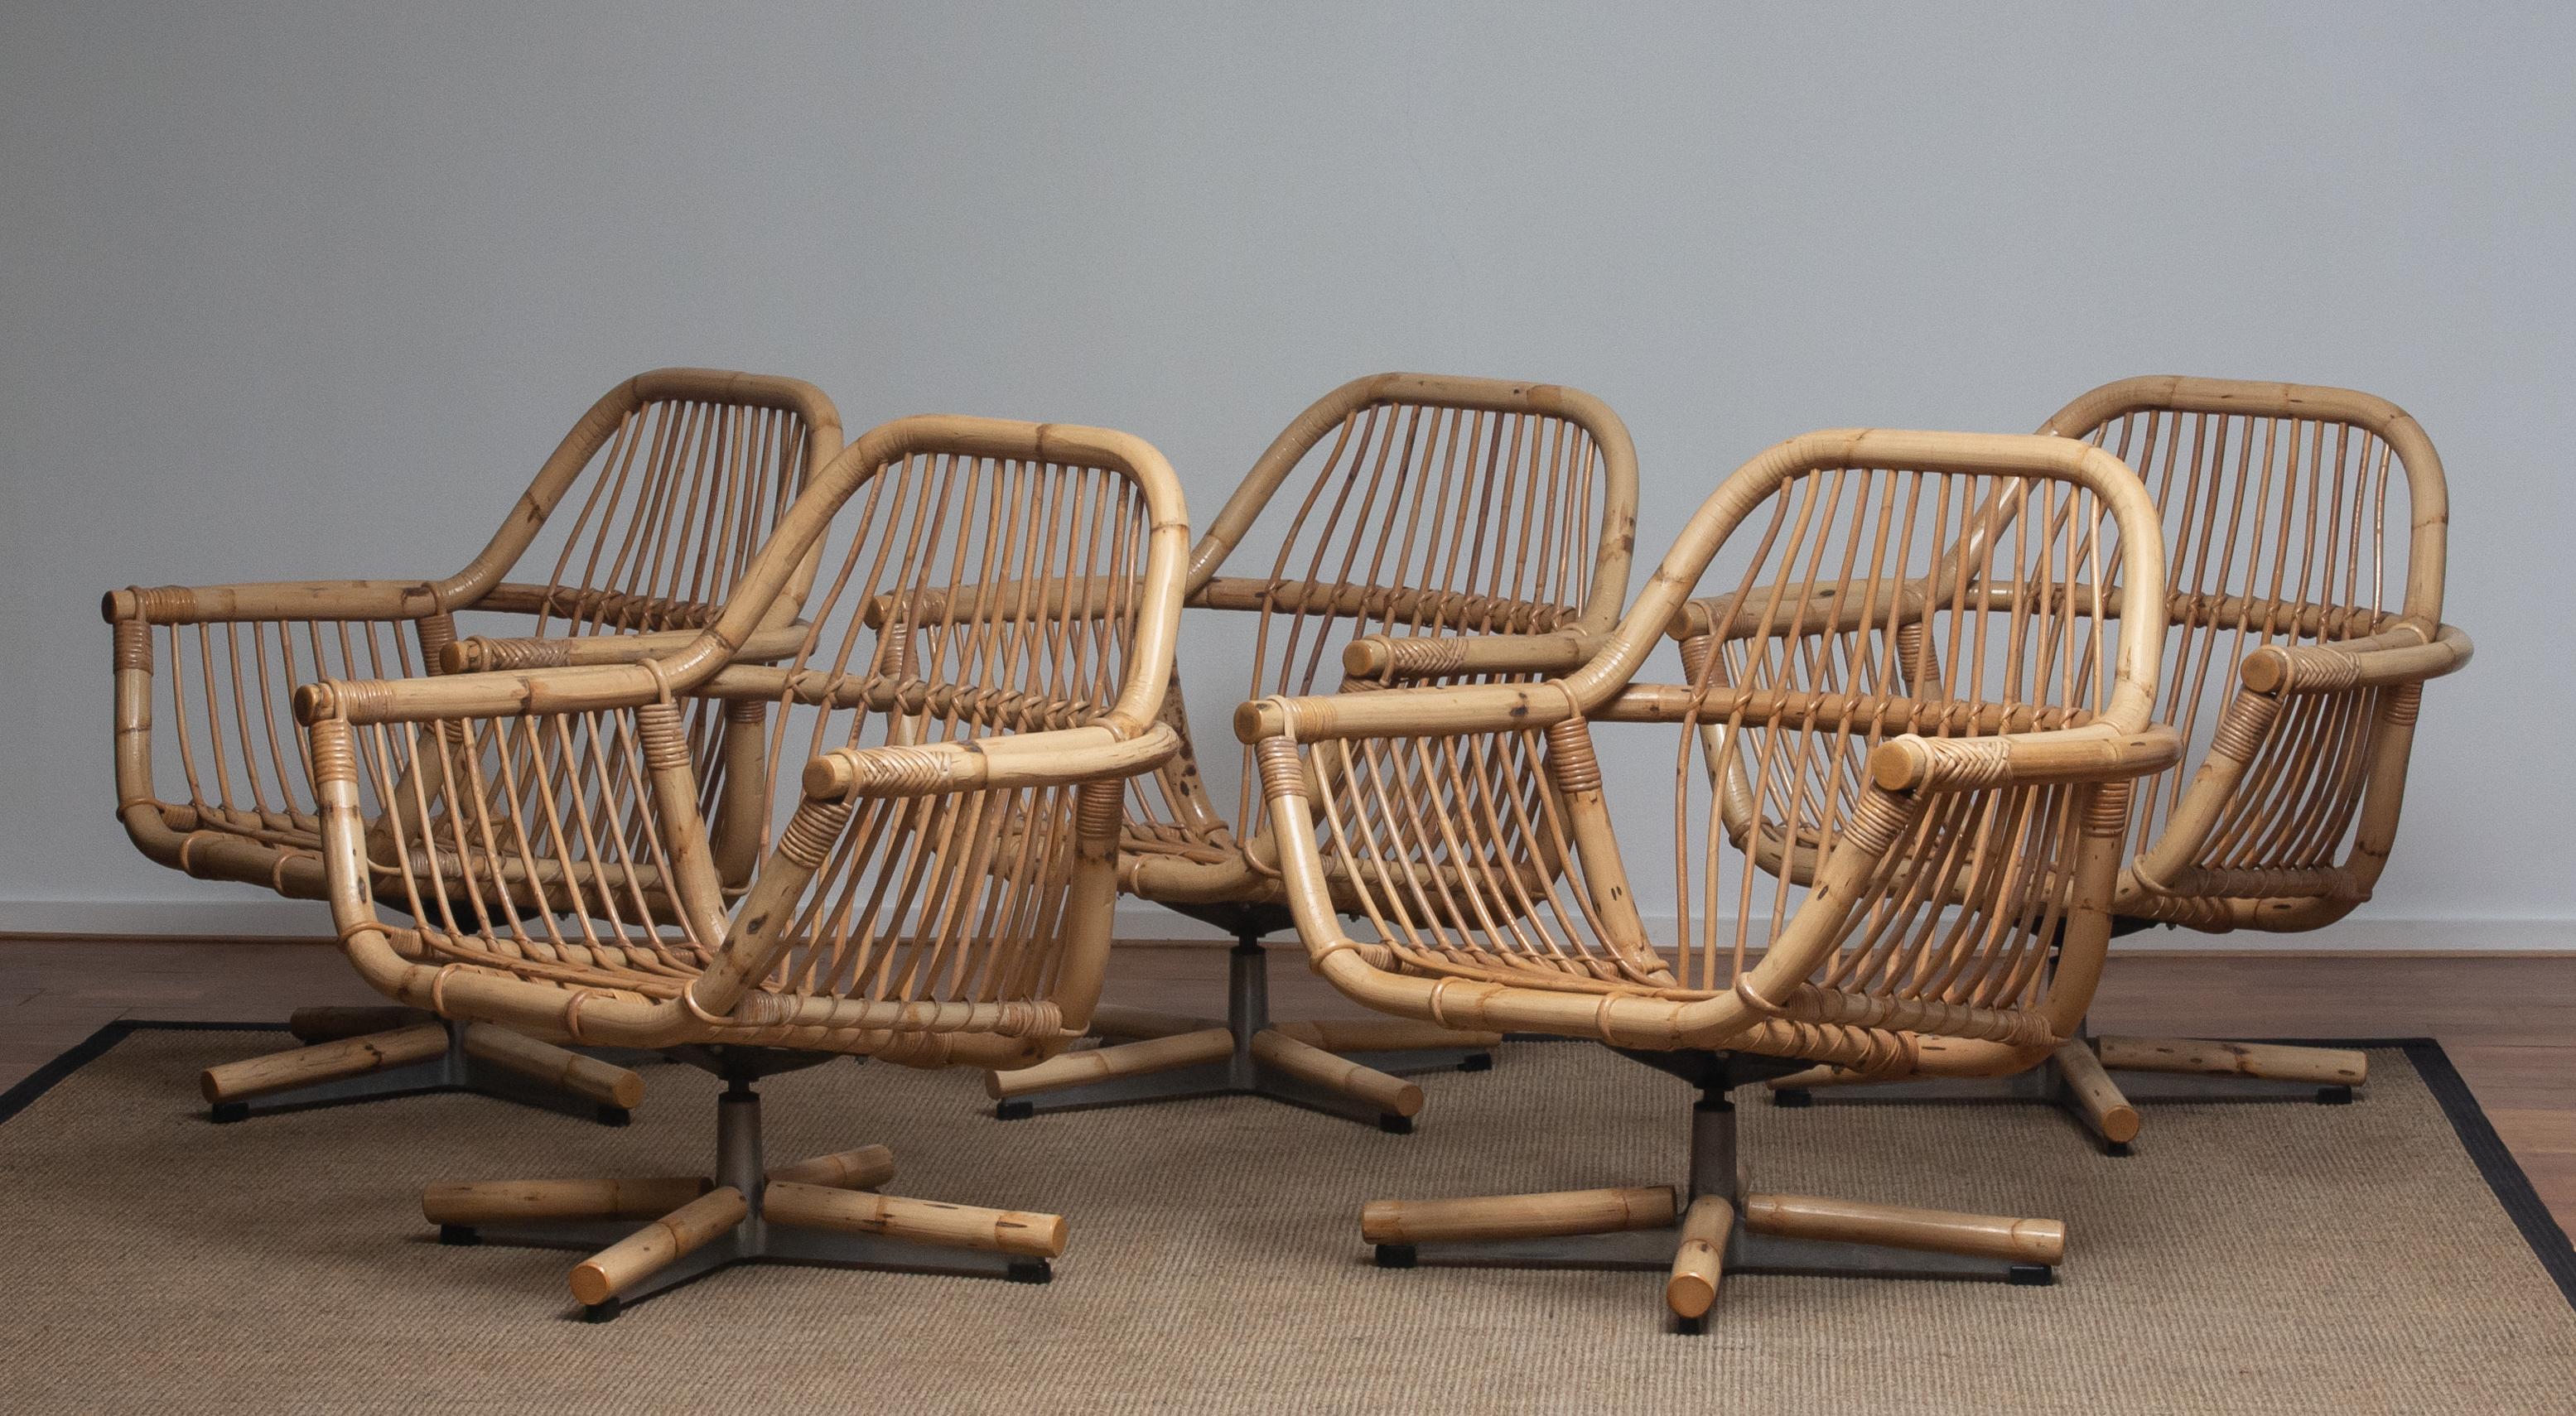 1960s Rattan Garden Set / Lounge Set Consist Five Swivel Chairs and Coffee Table 1